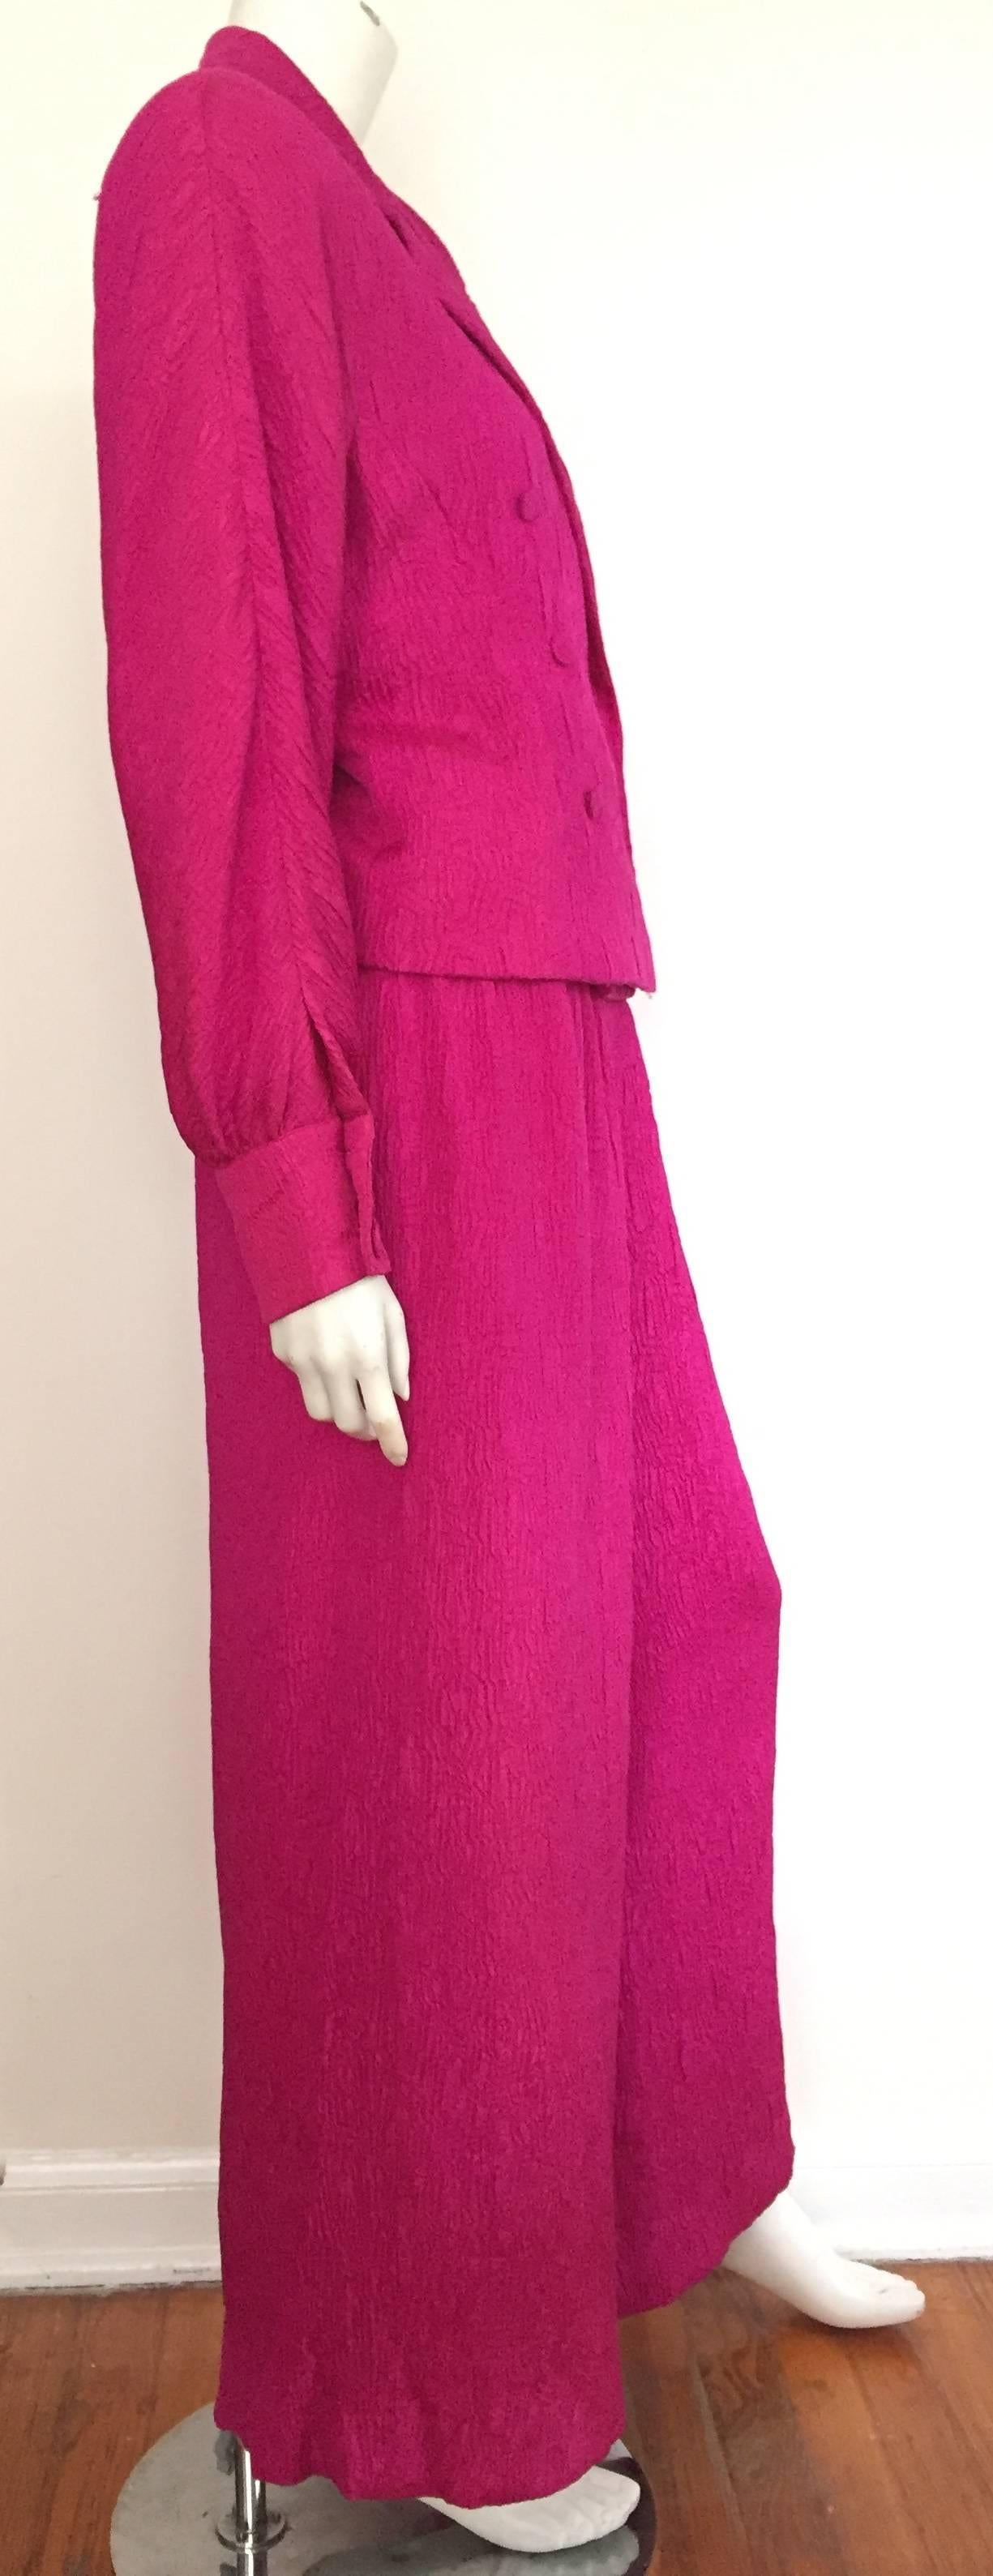 Adele Simpson Silk Pink Jacket and Palazzo Pants Size 6, 1980s For Sale 1